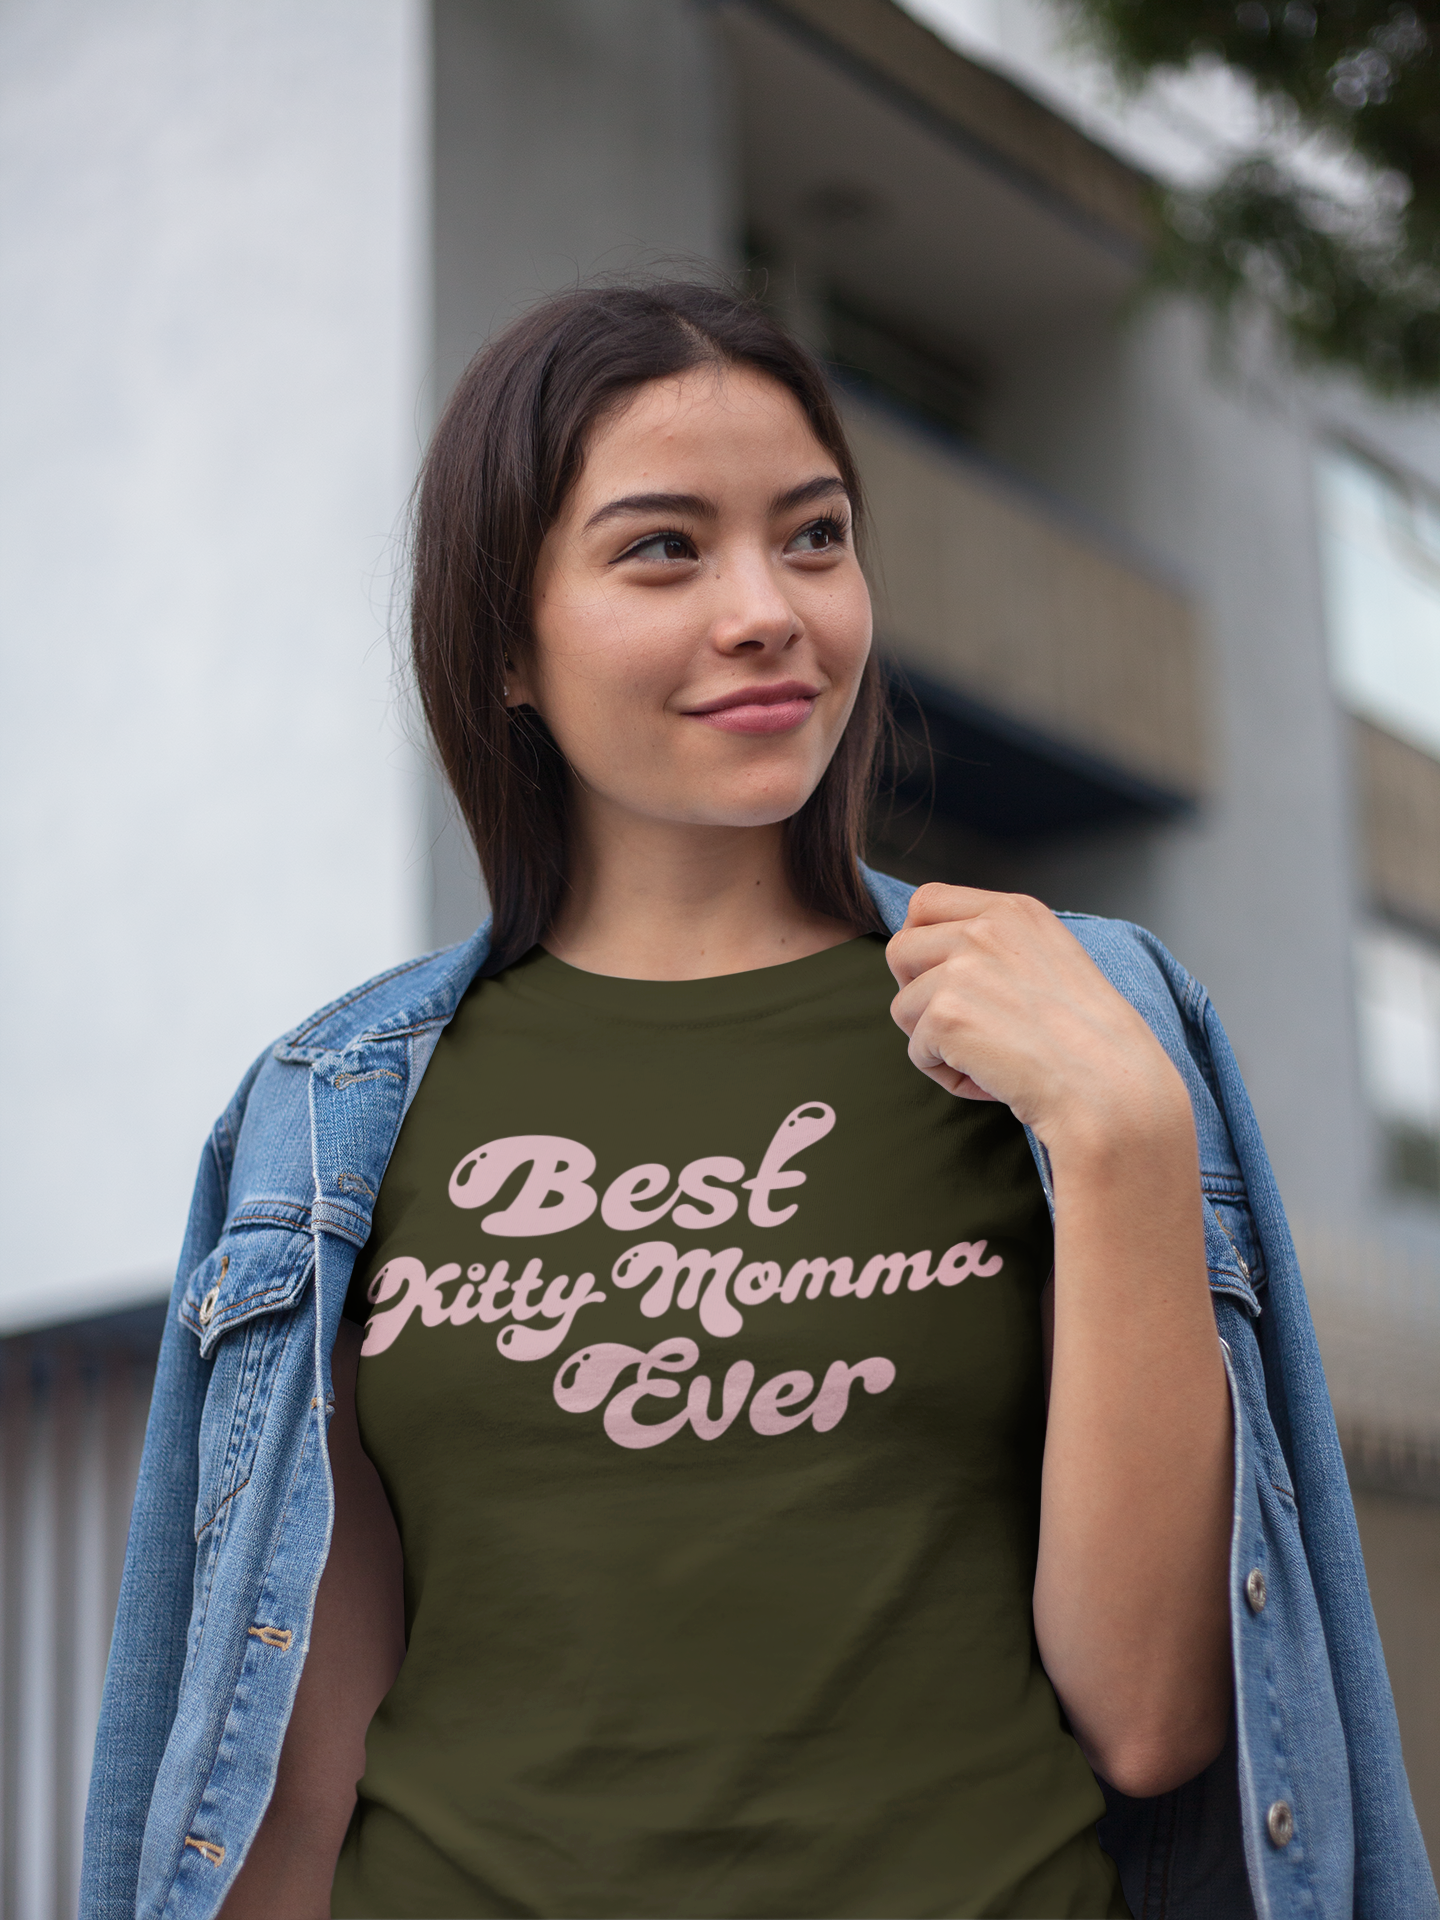 Best Kitty Momma Ever Graphic Tee